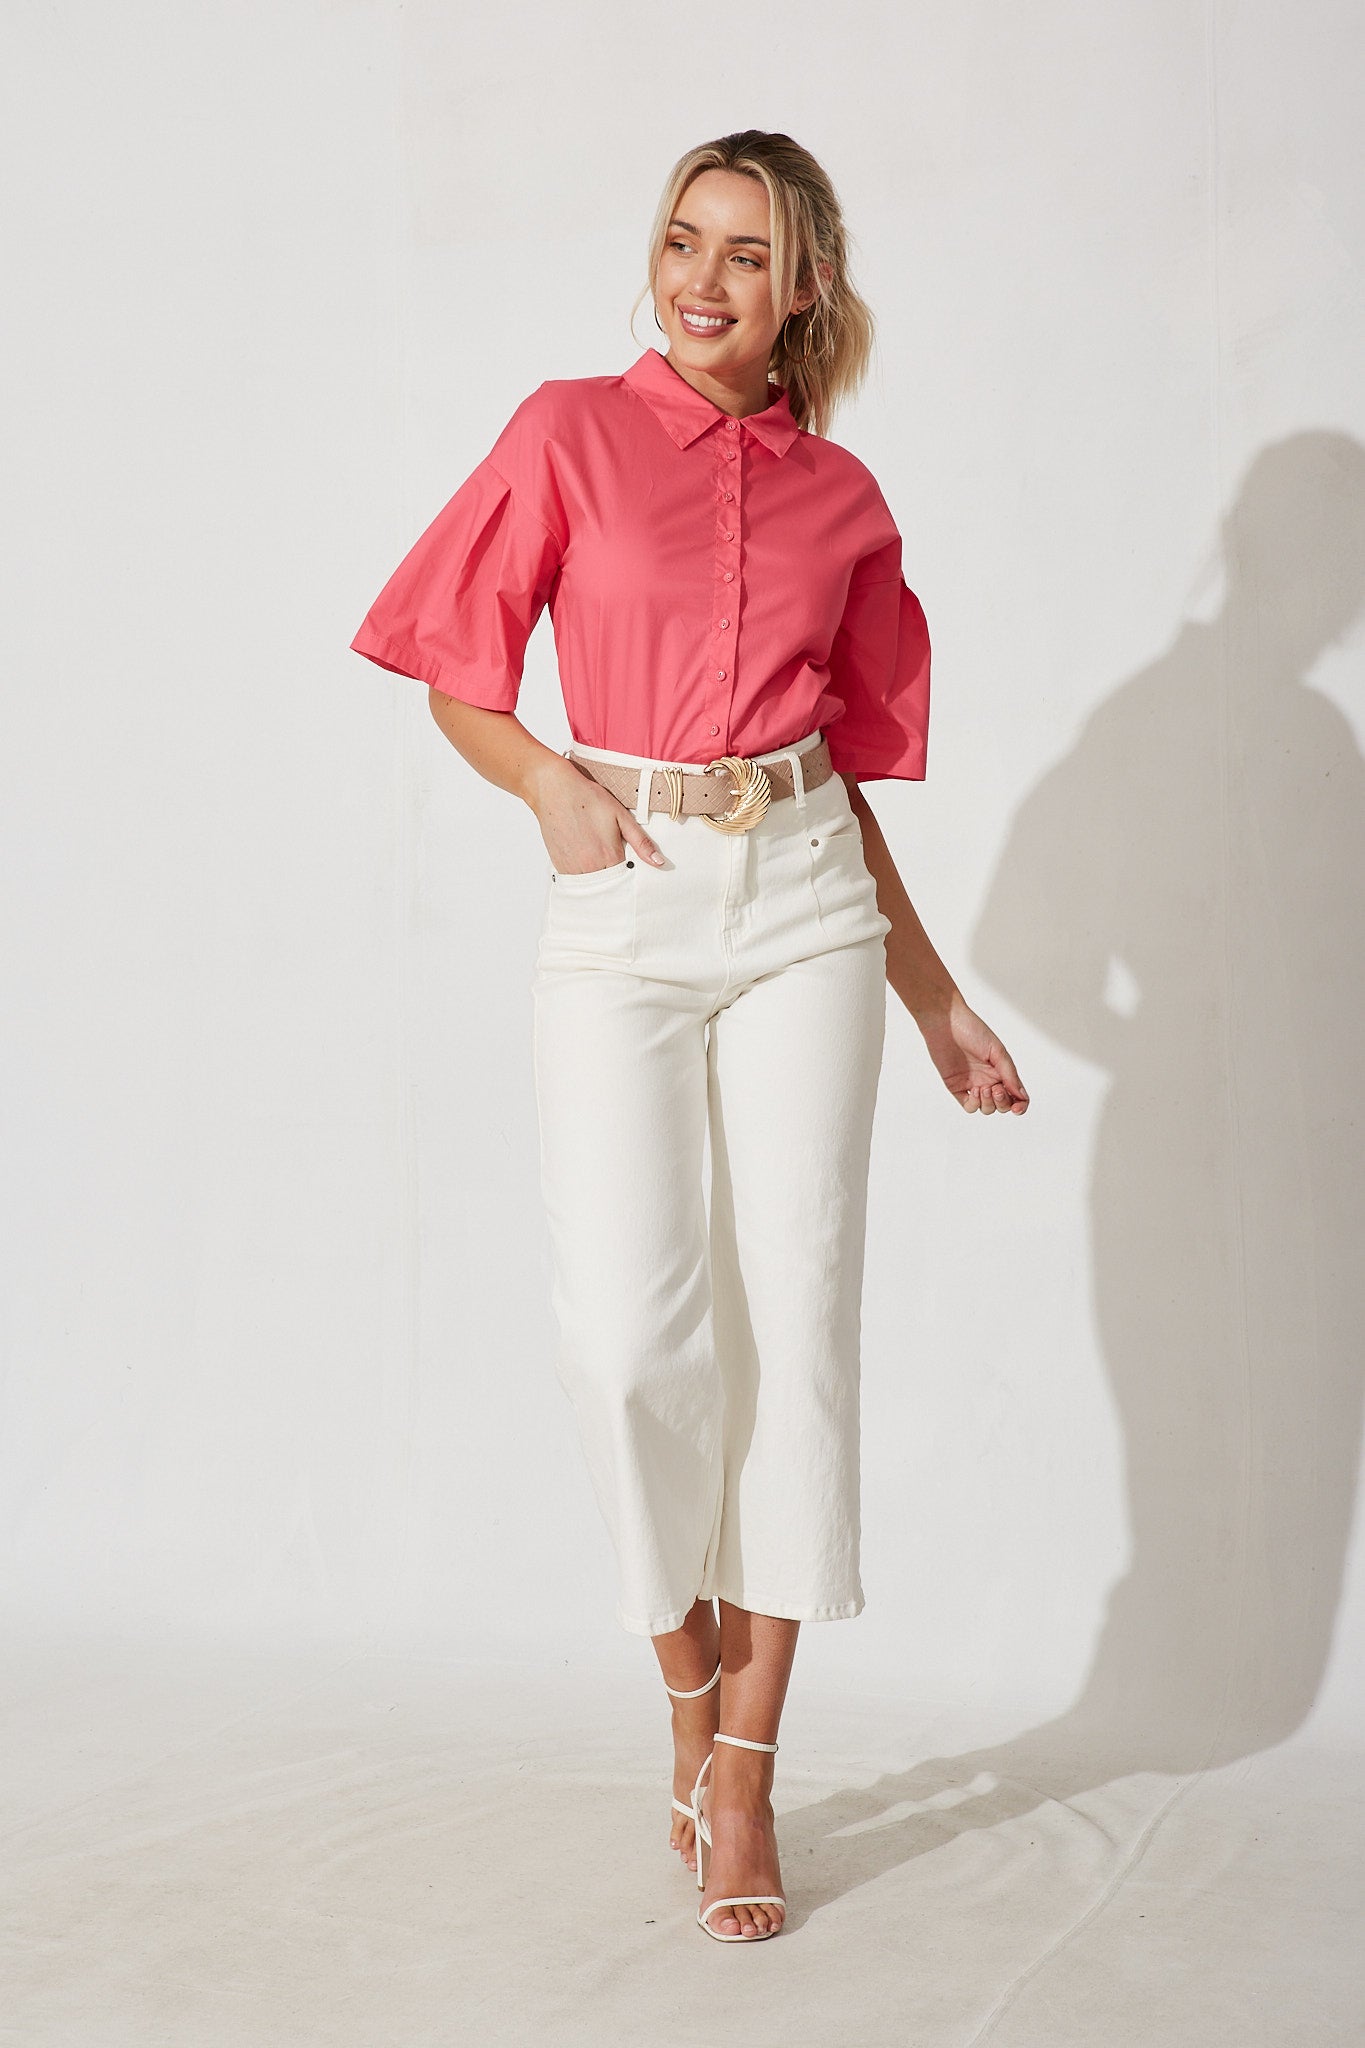 Wisteria Shirt In Hot Pink Cotton - full length